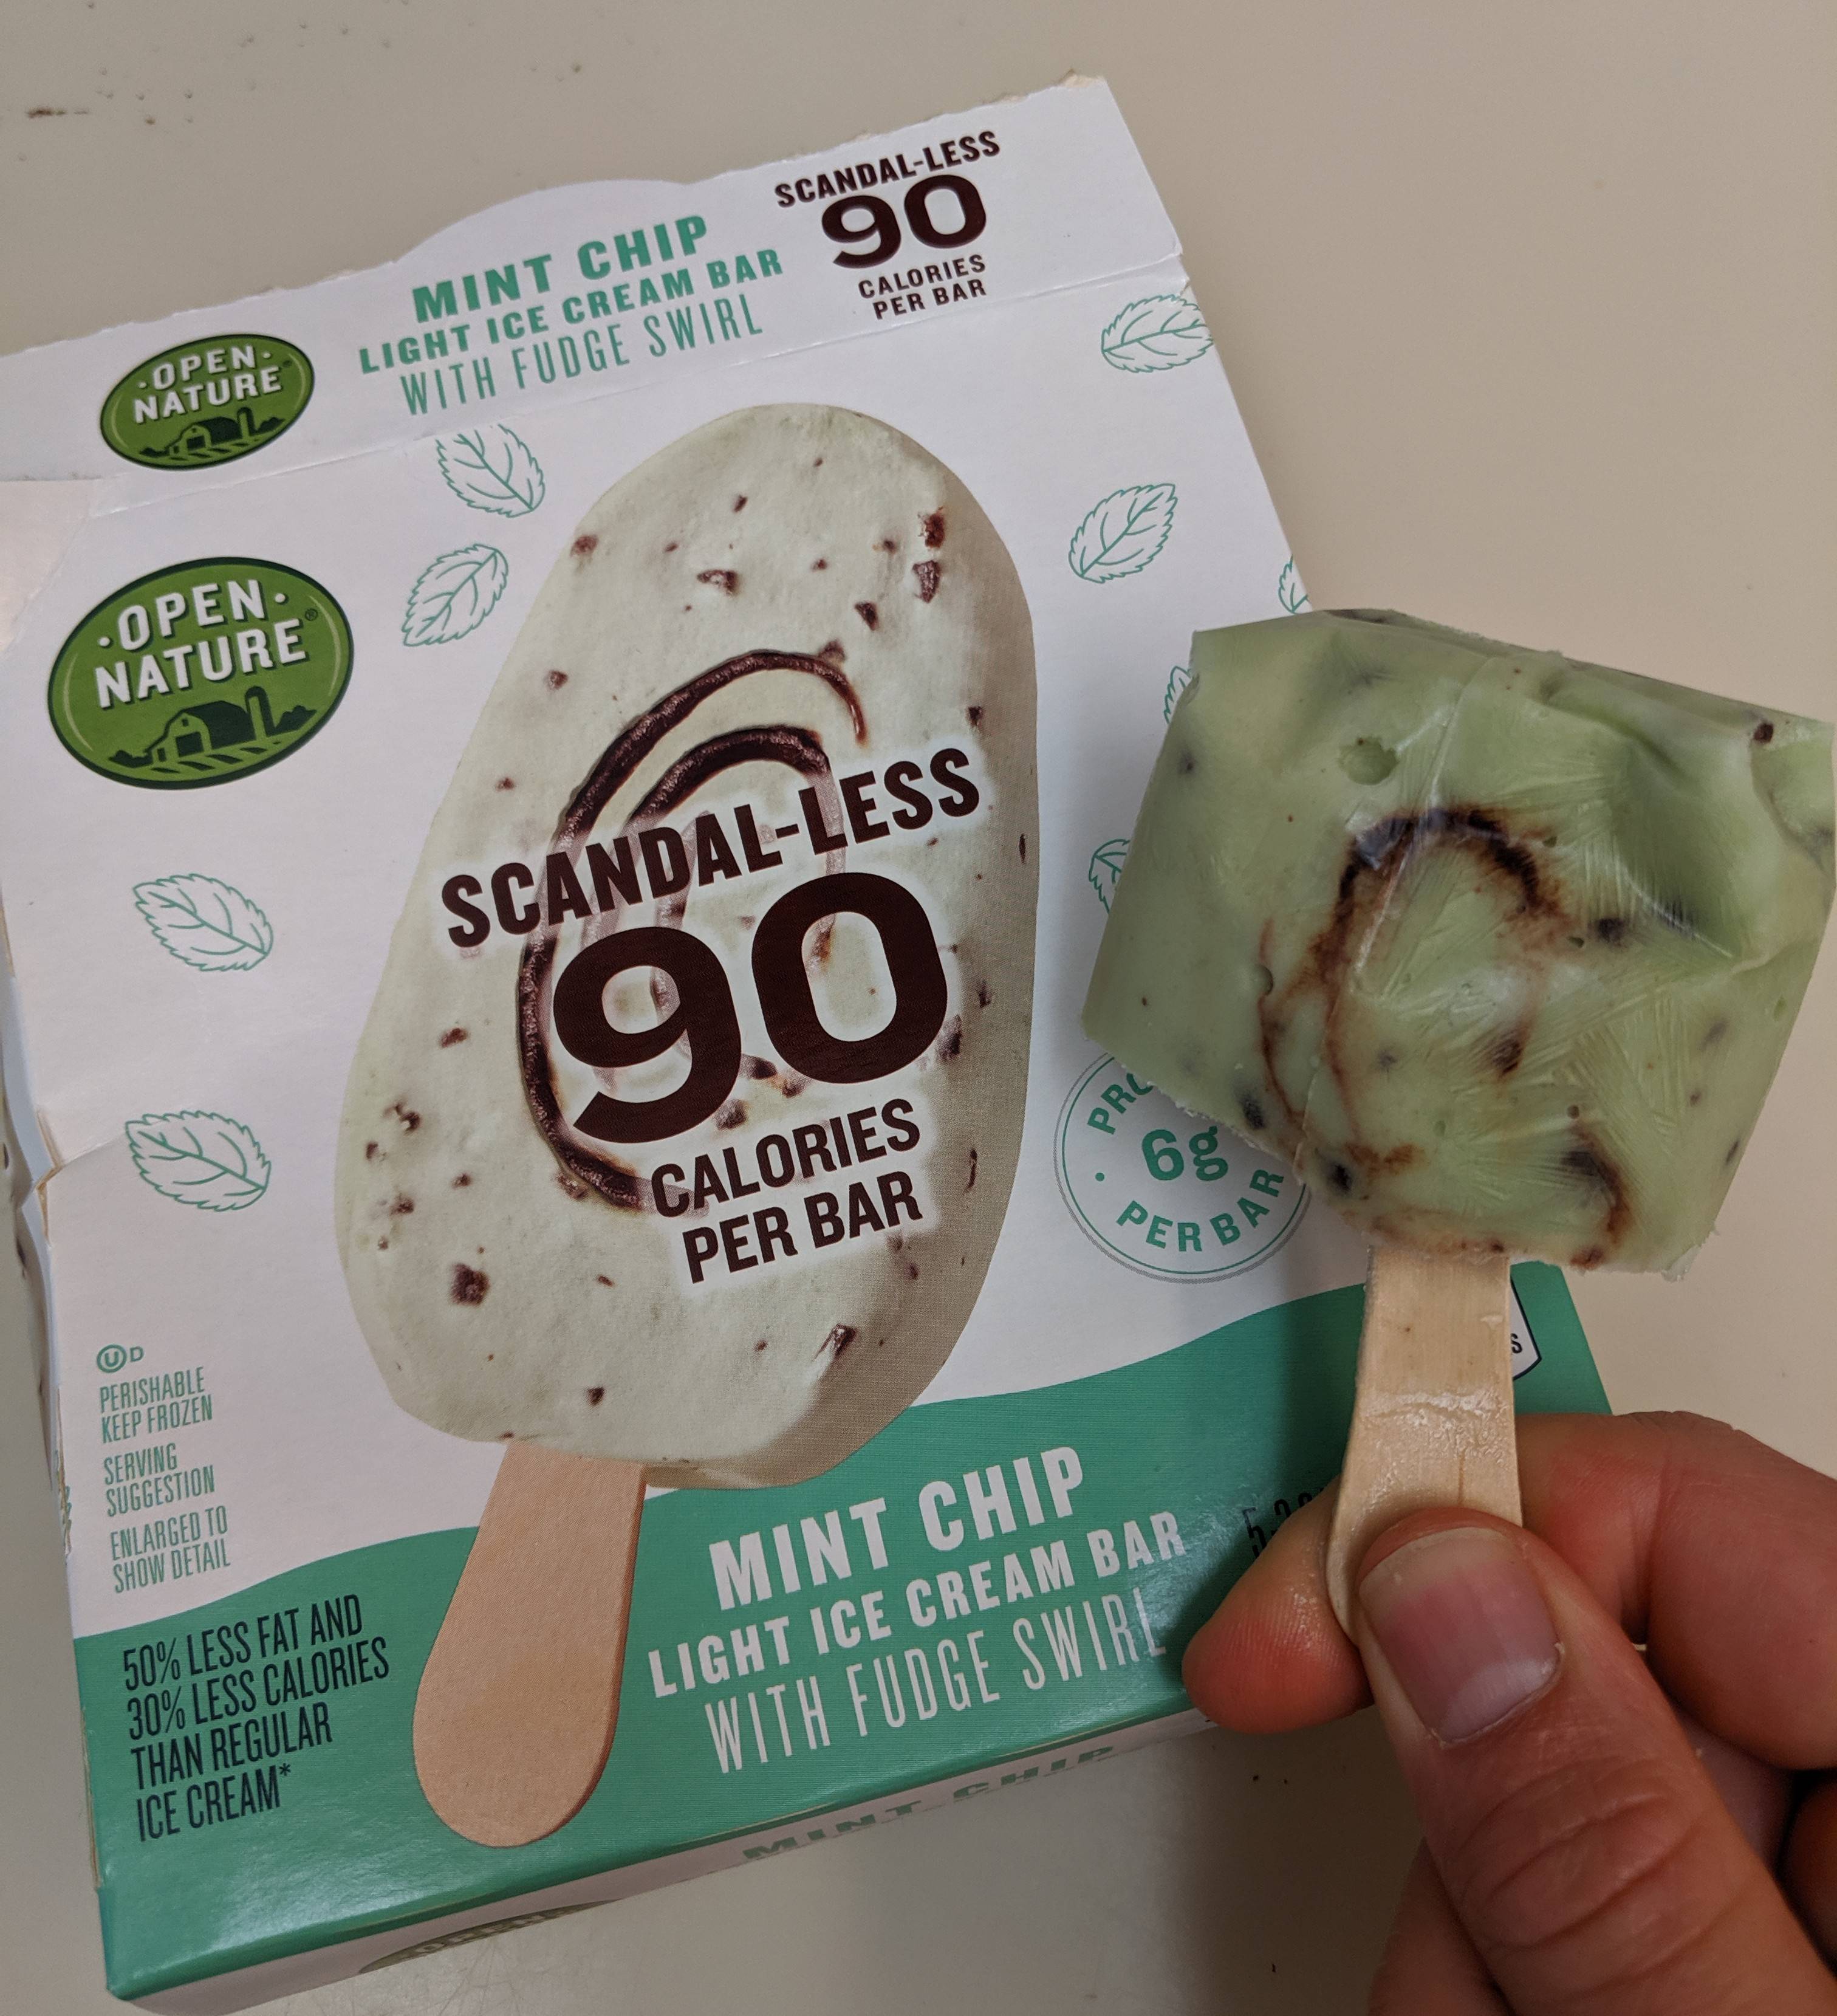 gelato - Salon Mint Chip Scandal Less Light Ice Cream Bar 9 0 With Fudge Swirl Nature Open Nature ScandalLess Calories Per Bar 50S Less Fat And 30% Lens Calores Than Rerilar Ice Cream Mint Chip Light Ice Cream Bar With Fudge Swire